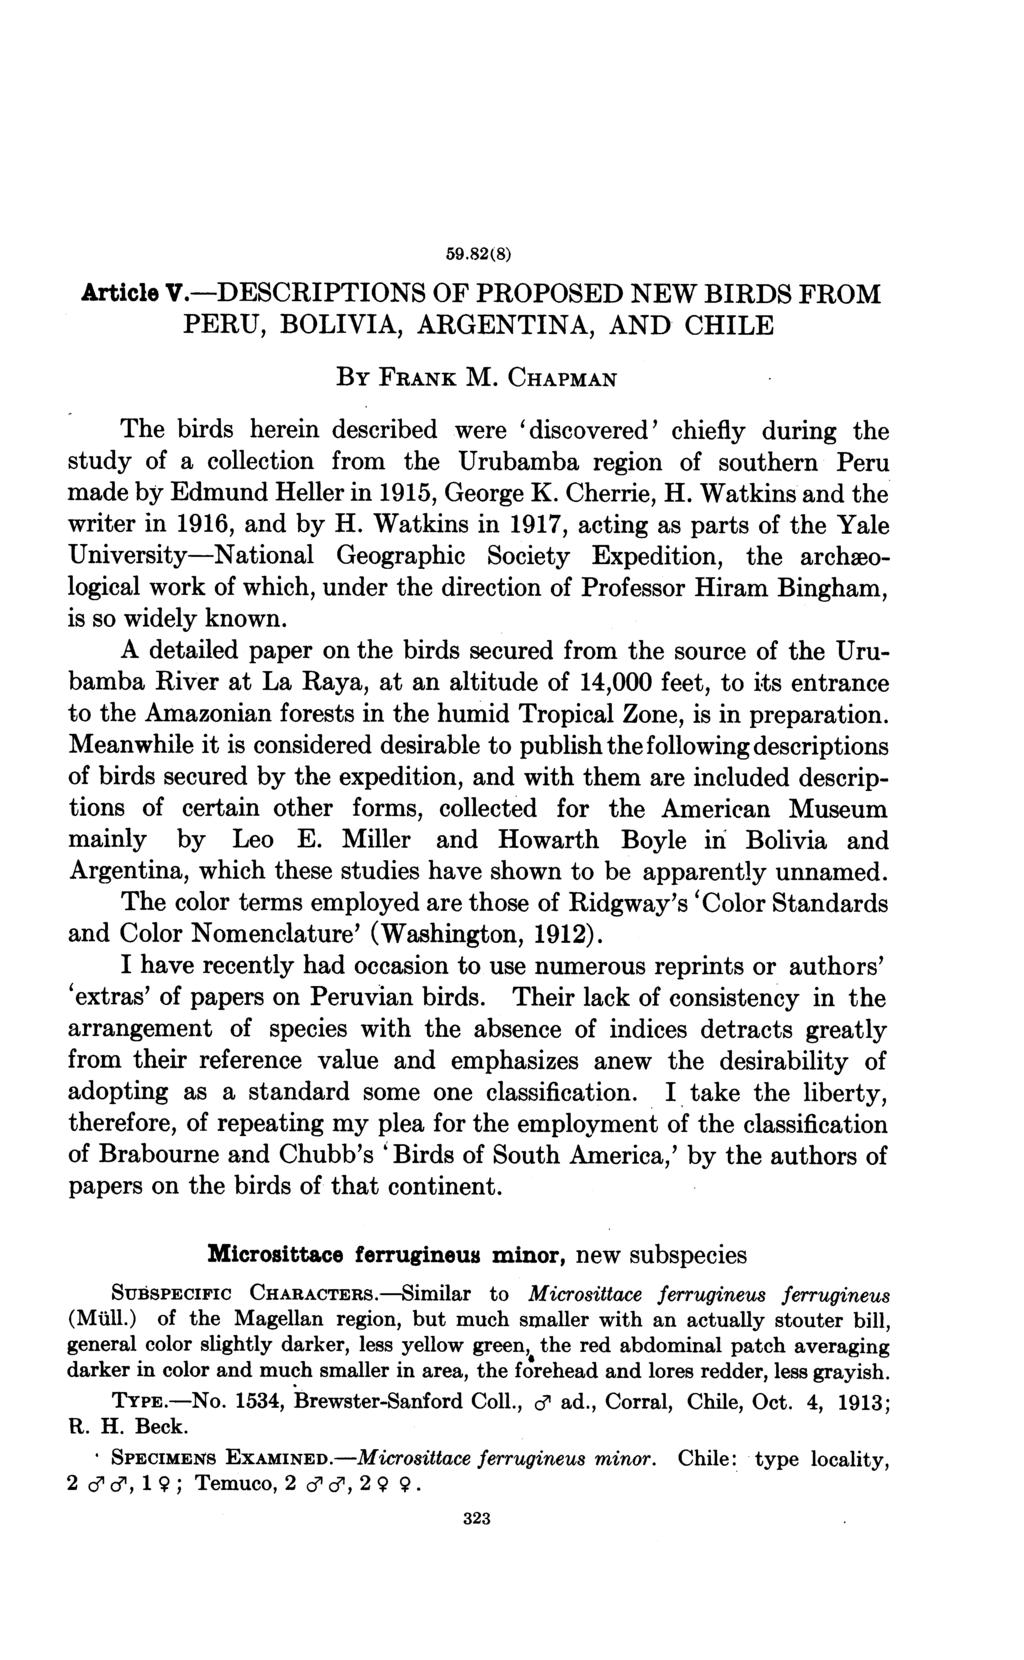 59.82(8) Article V.-DESCRIPTIONS OF PROPOSED NEW BIRDS FROM PERU, BOLIVIA, ARGENTINA, AND CHILE BY FRANK M.